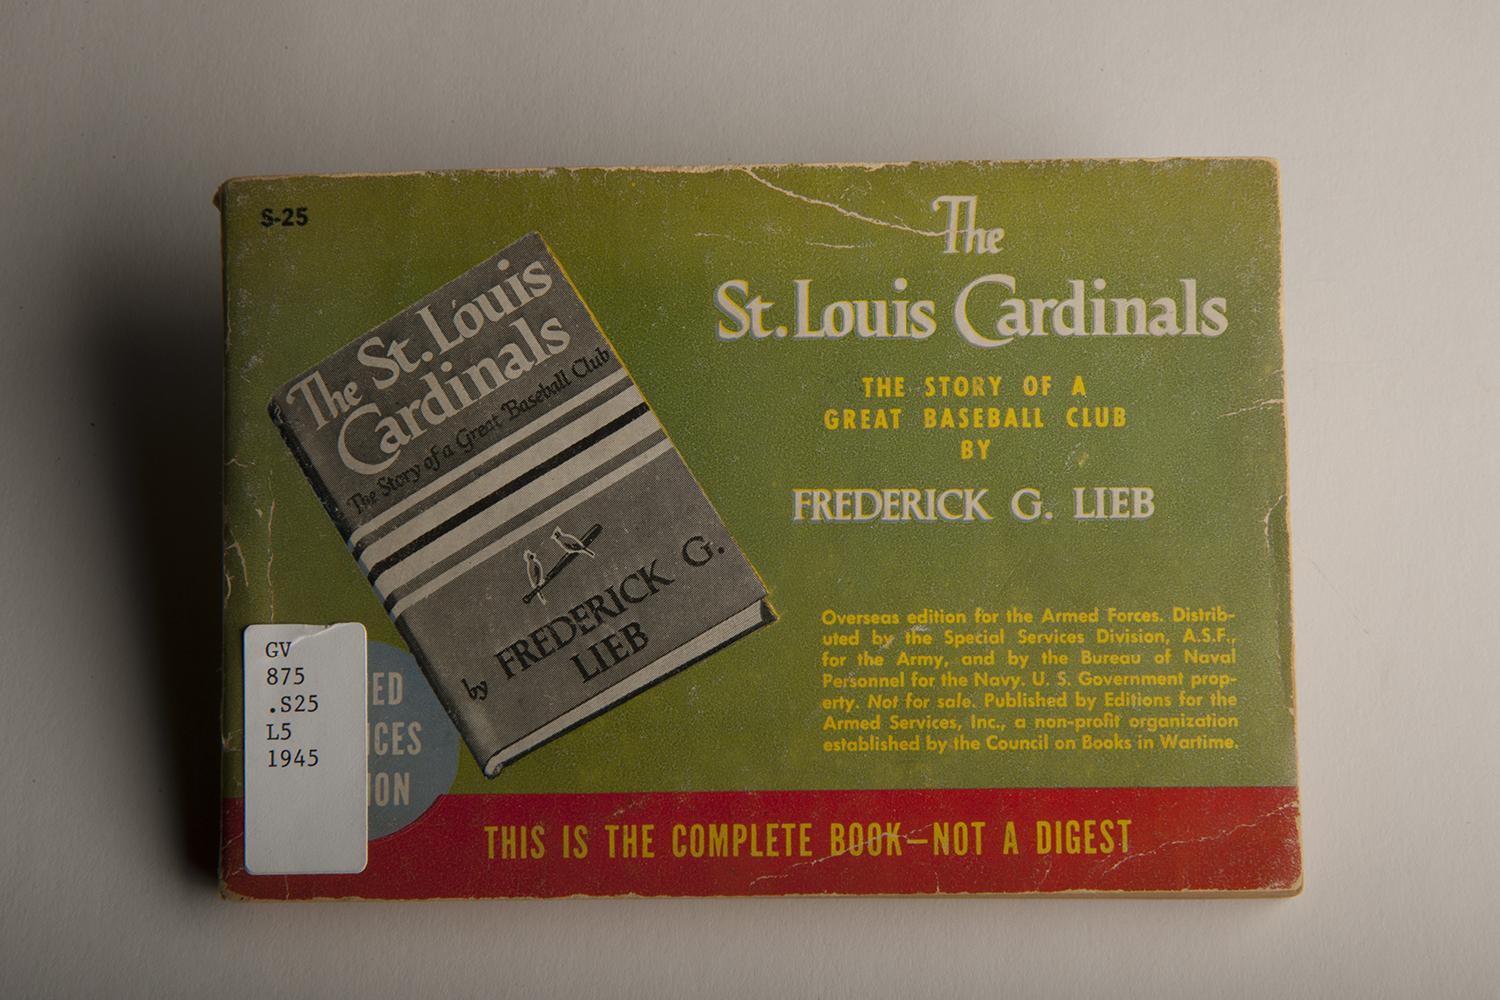 The St. Louis Cardinals in the 1940s [Book]